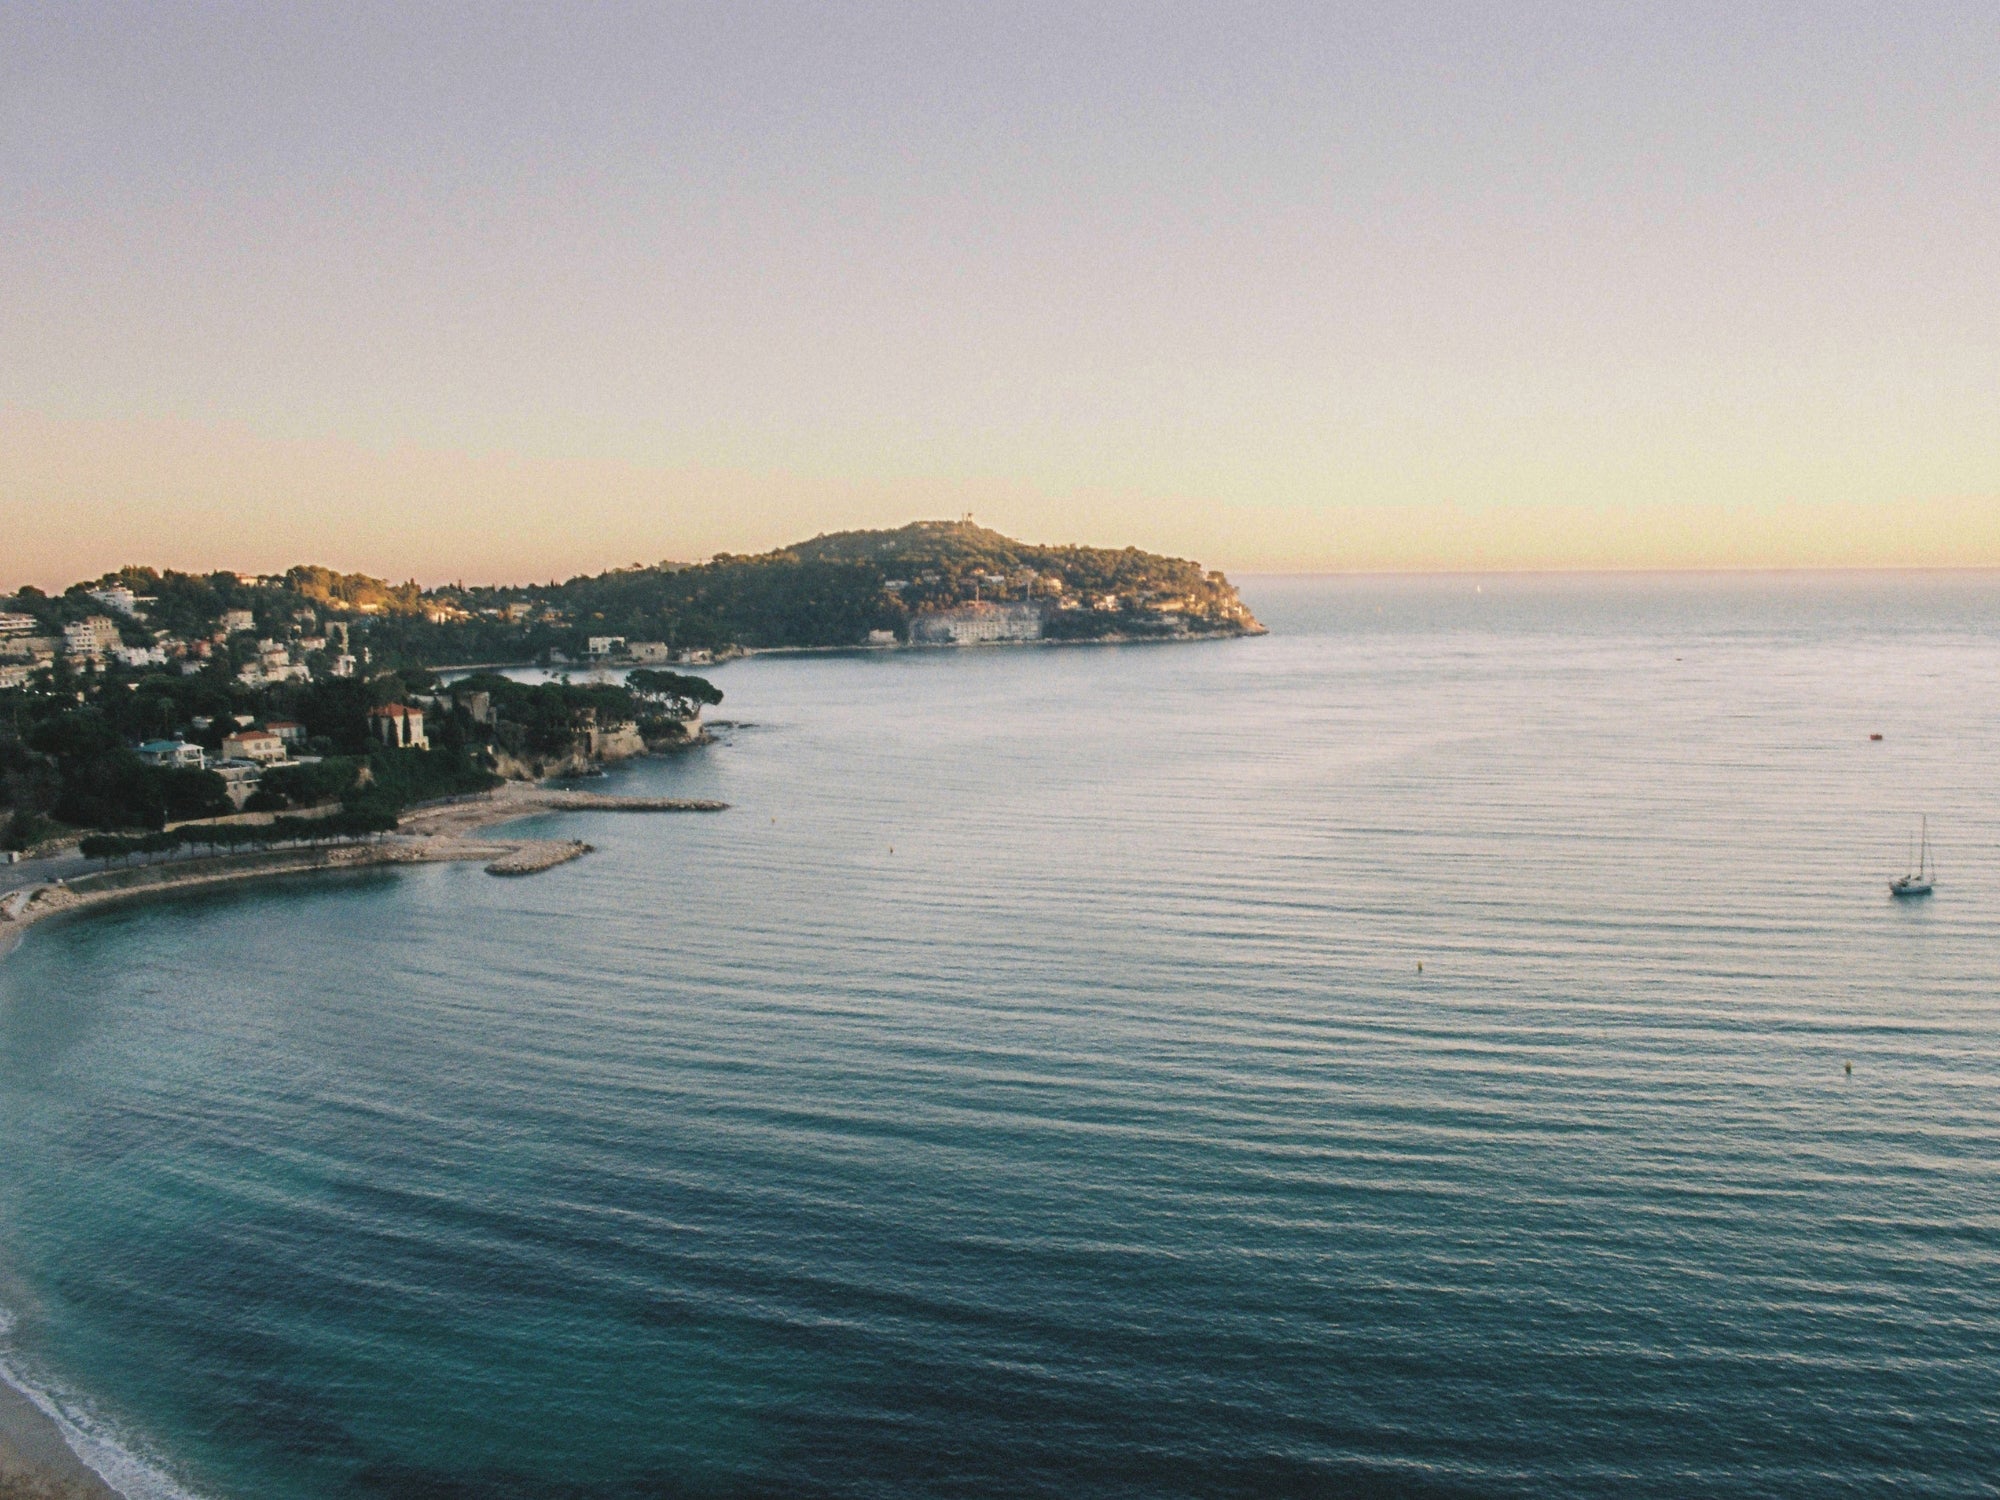 Bay of Villefranche-sur-Mer, with Cap Ferrat in the distance, at sunset, in the South of France